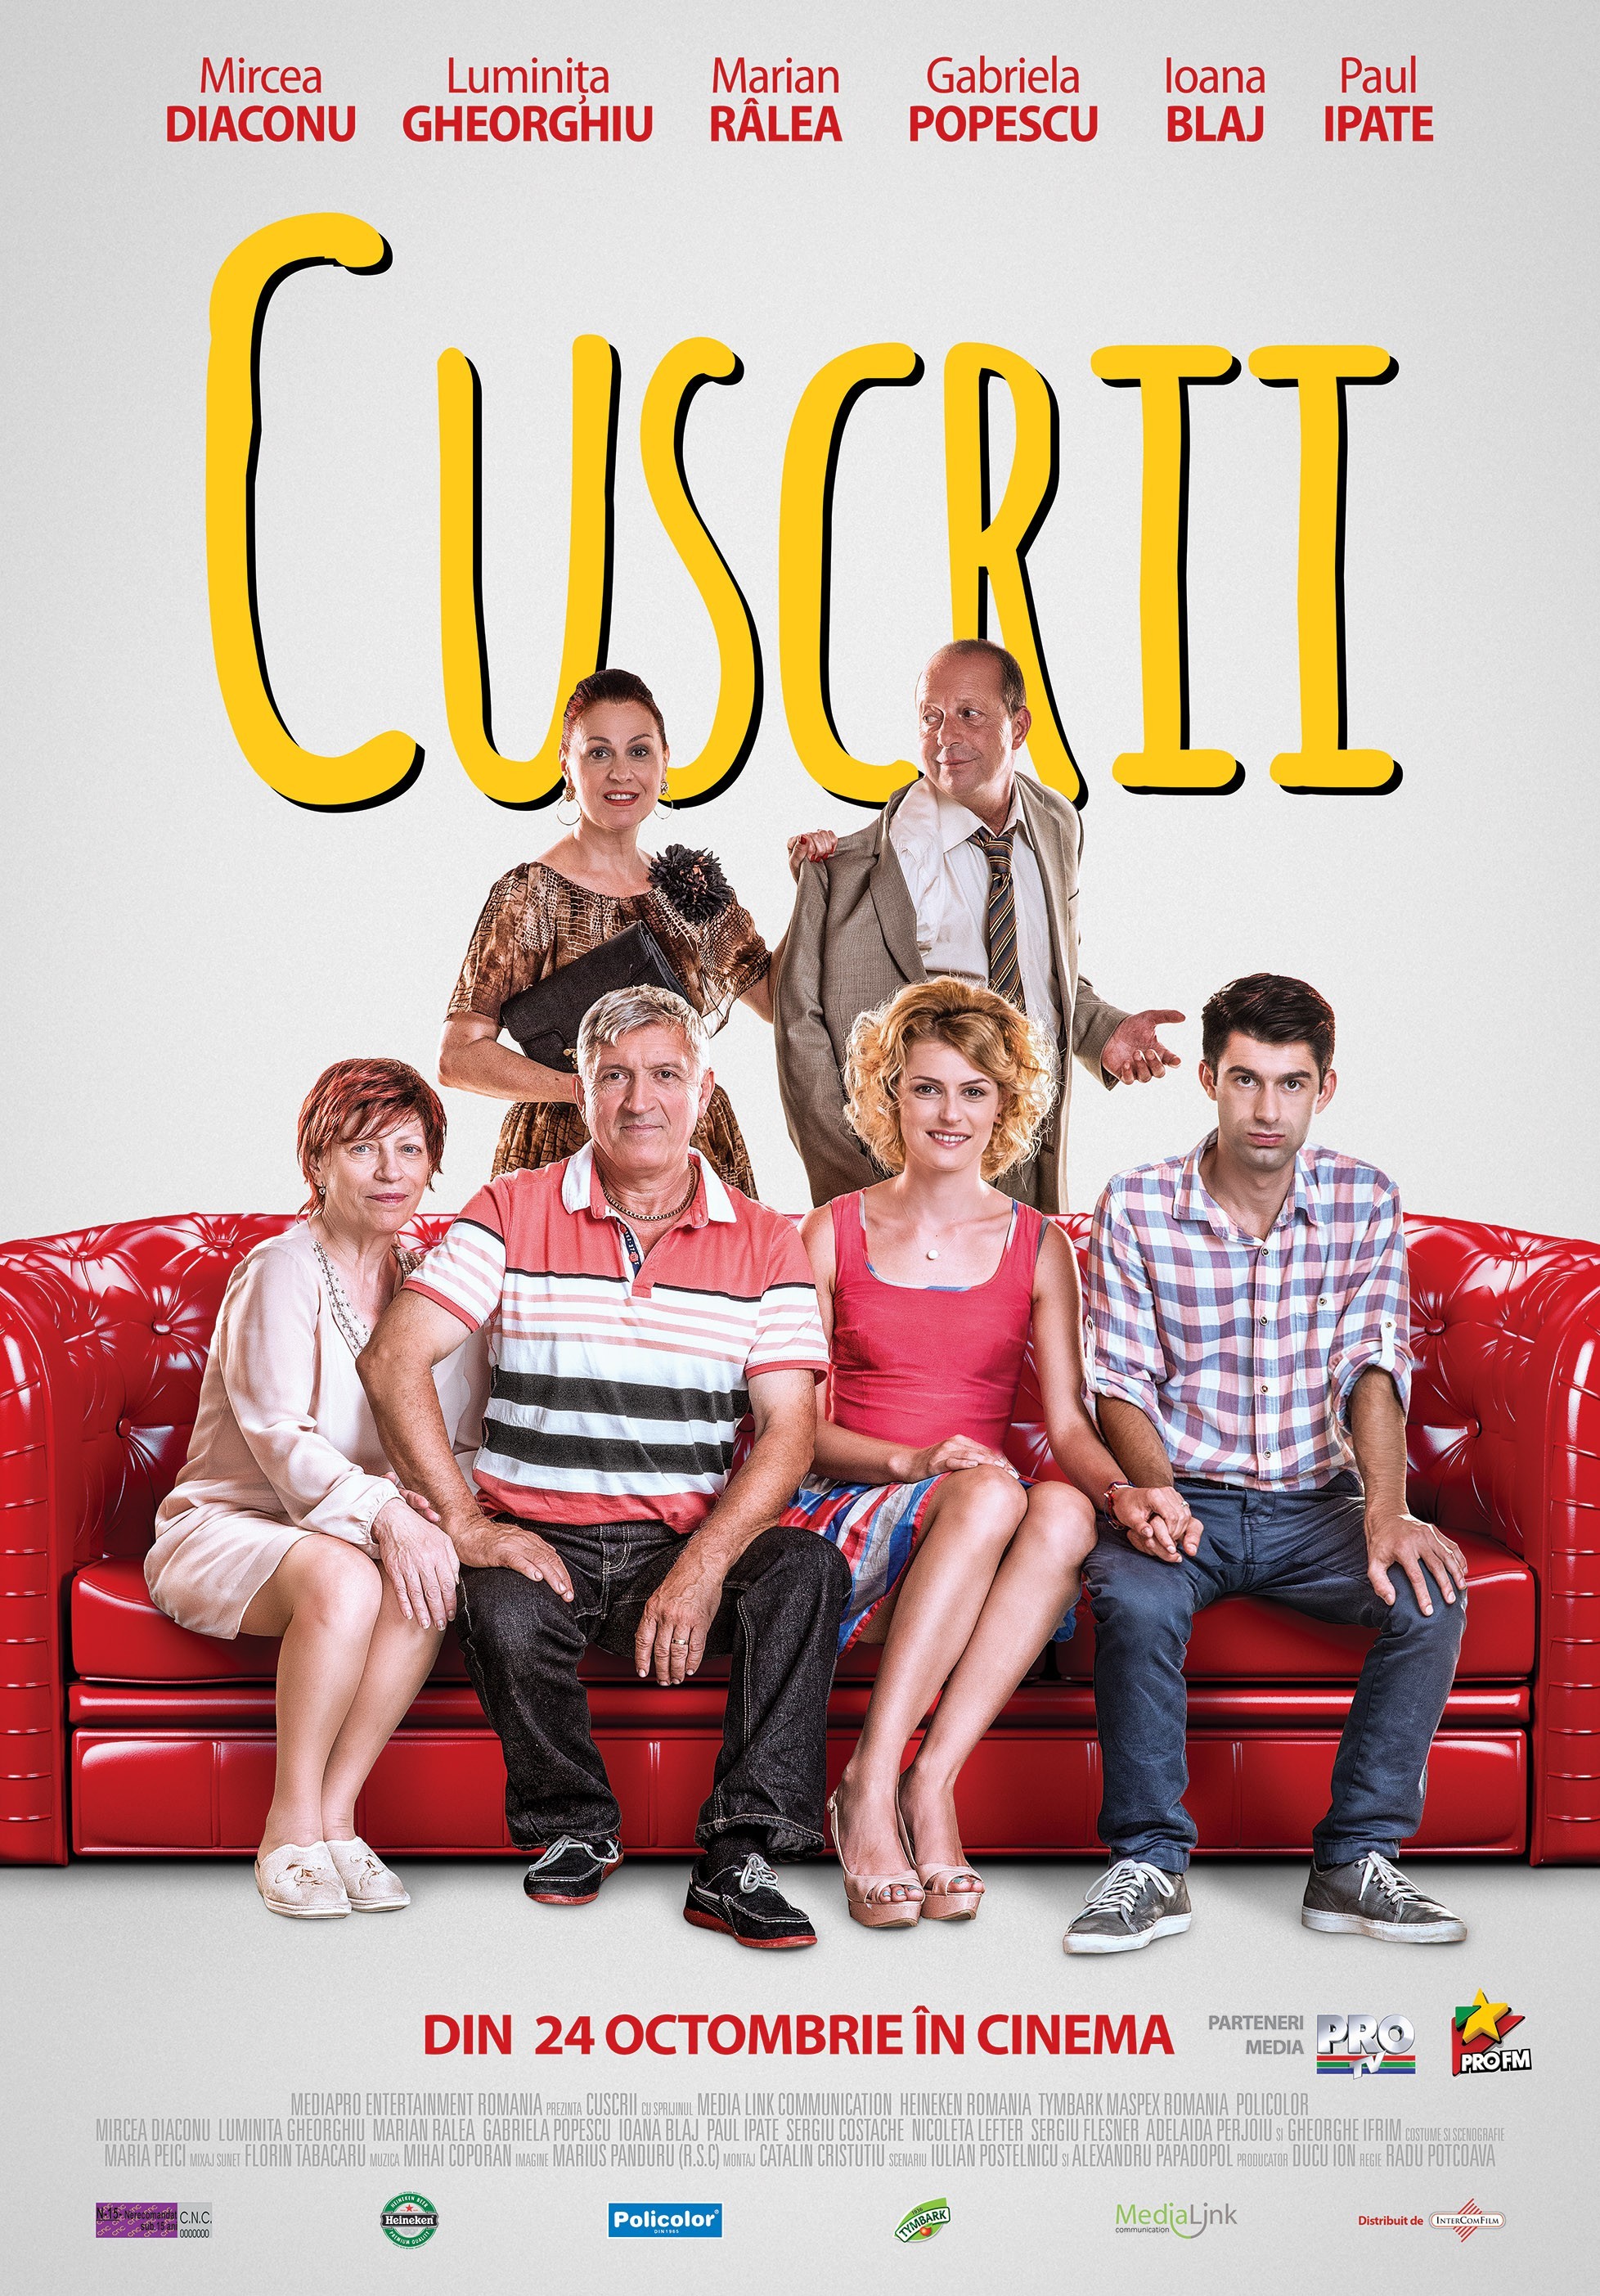 Mega Sized Movie Poster Image for Cuscrii 